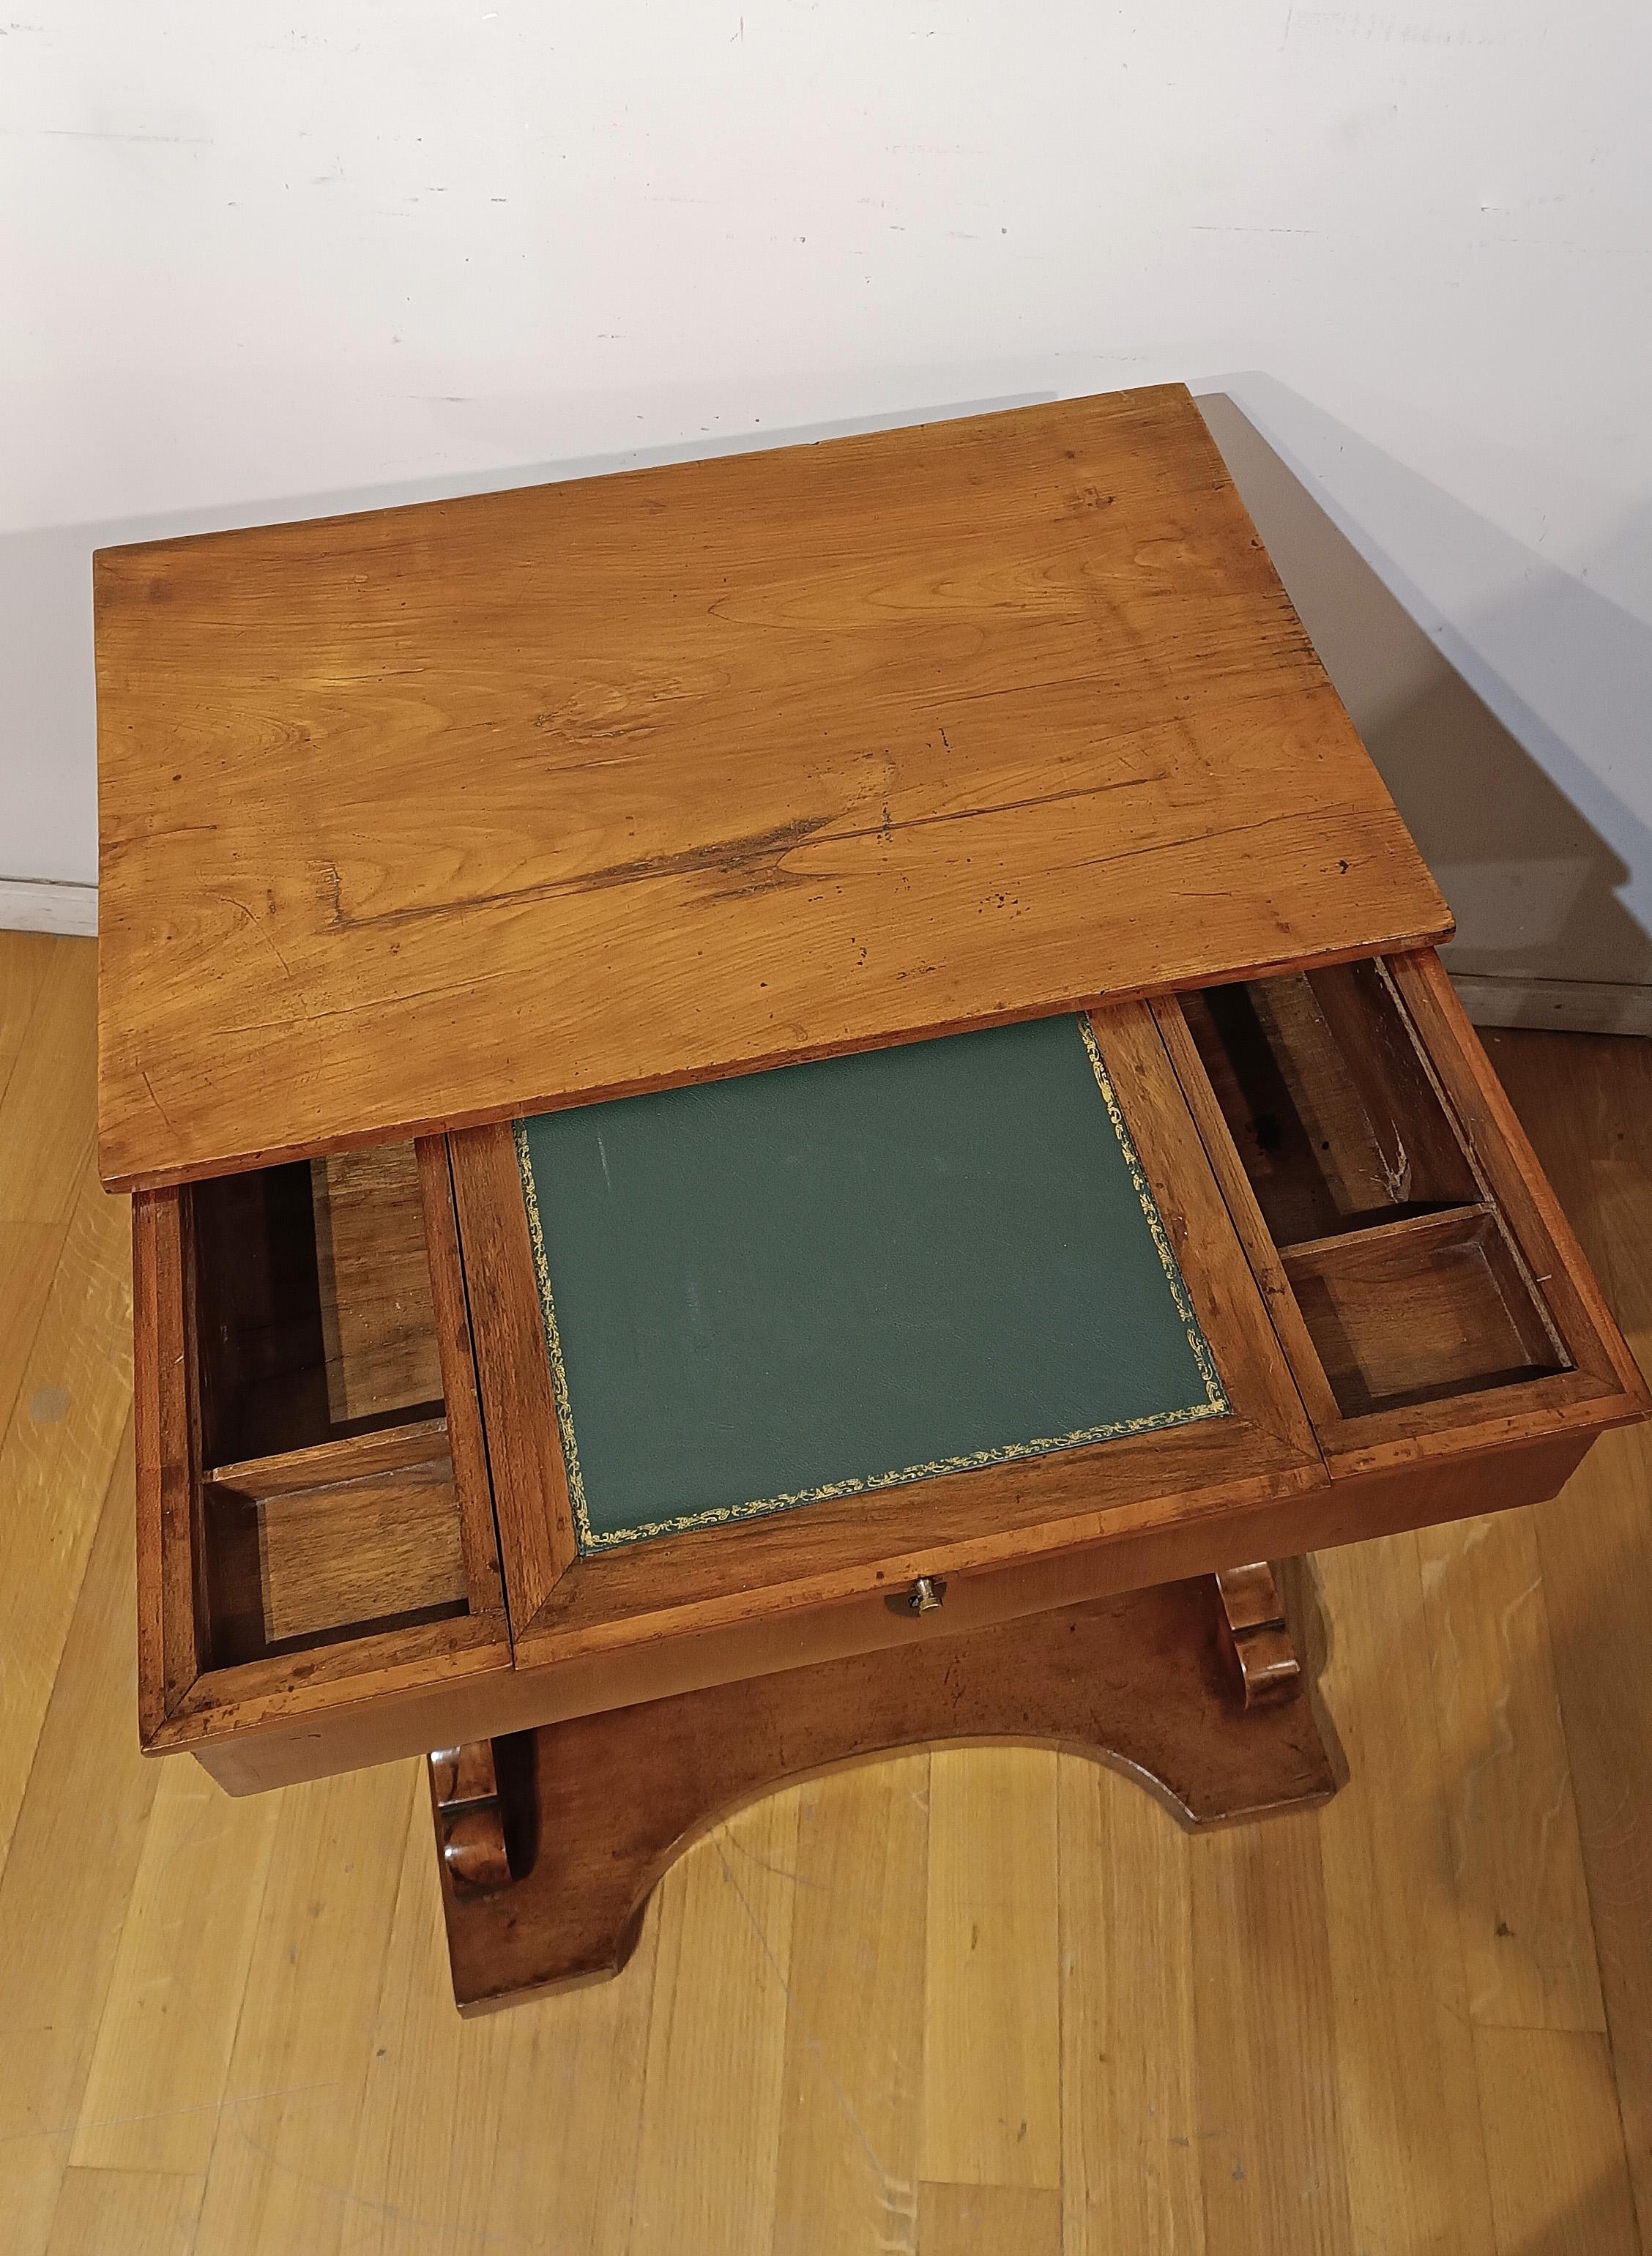 EARLY 19th CENTURY SMALL WORKING TABLE For Sale 1